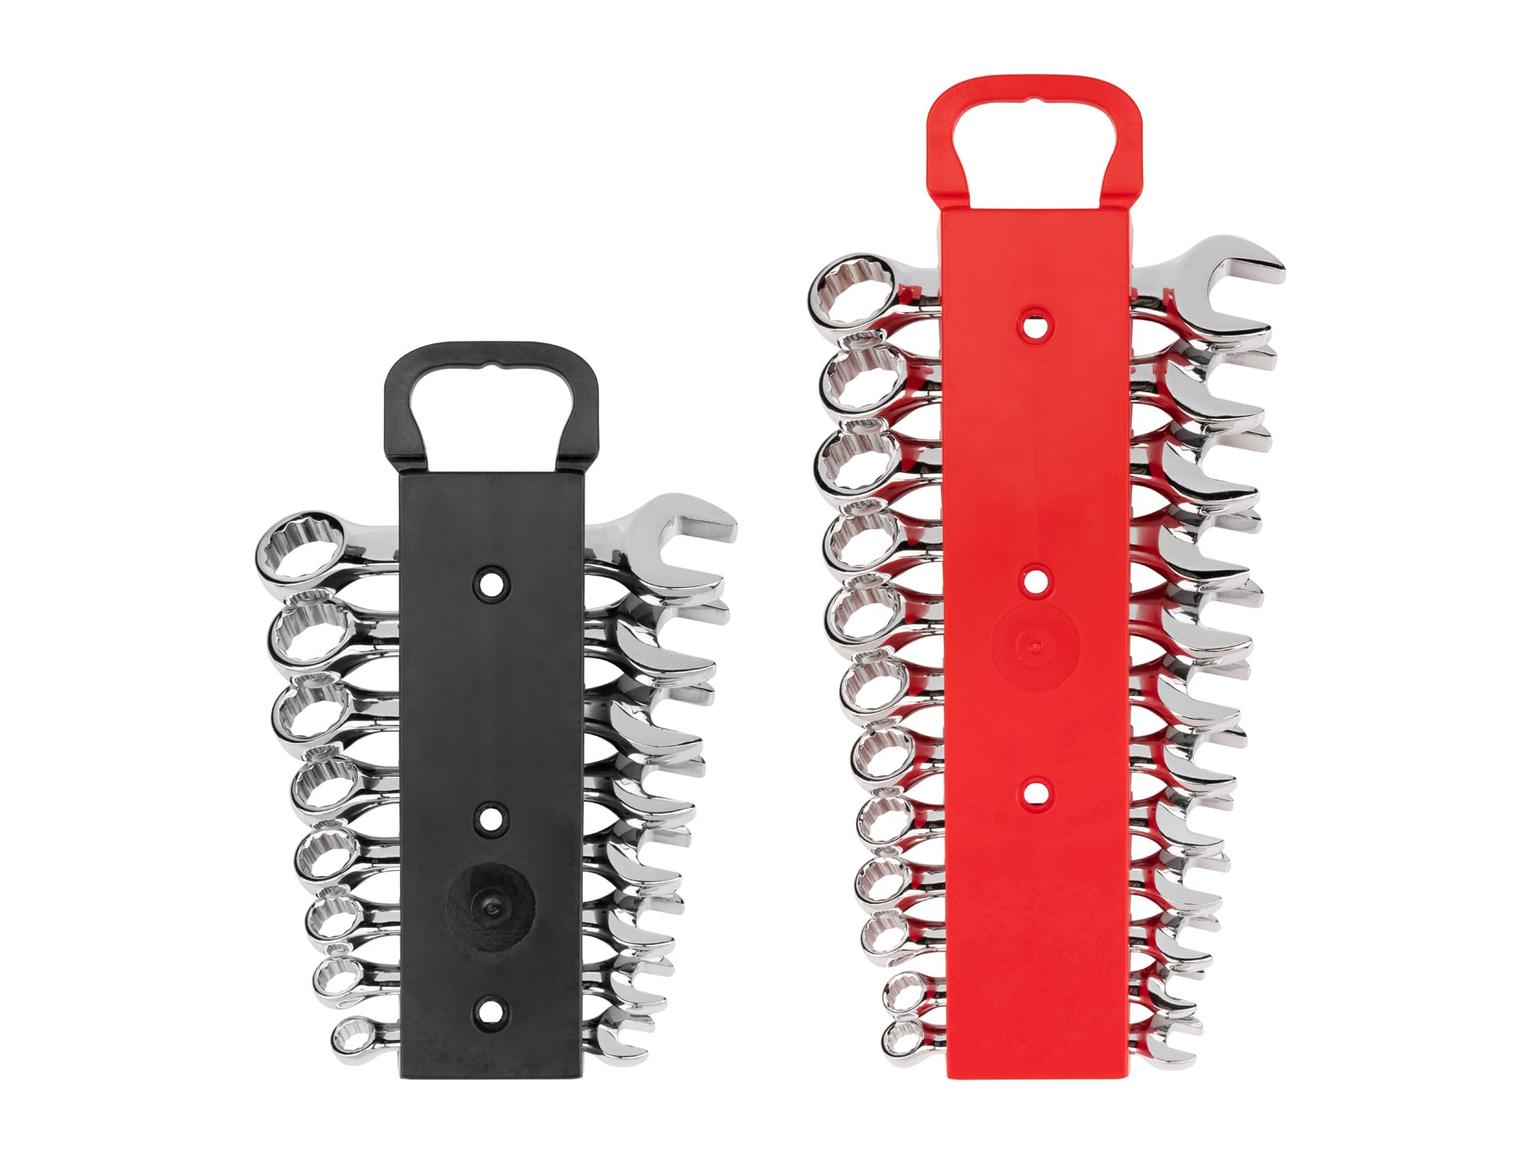 TEKTON WCB91601-T Stubby Combination Wrench Set with Holder, 20-Piece (5/16 - 3/4 in., 8 - 19 mm)